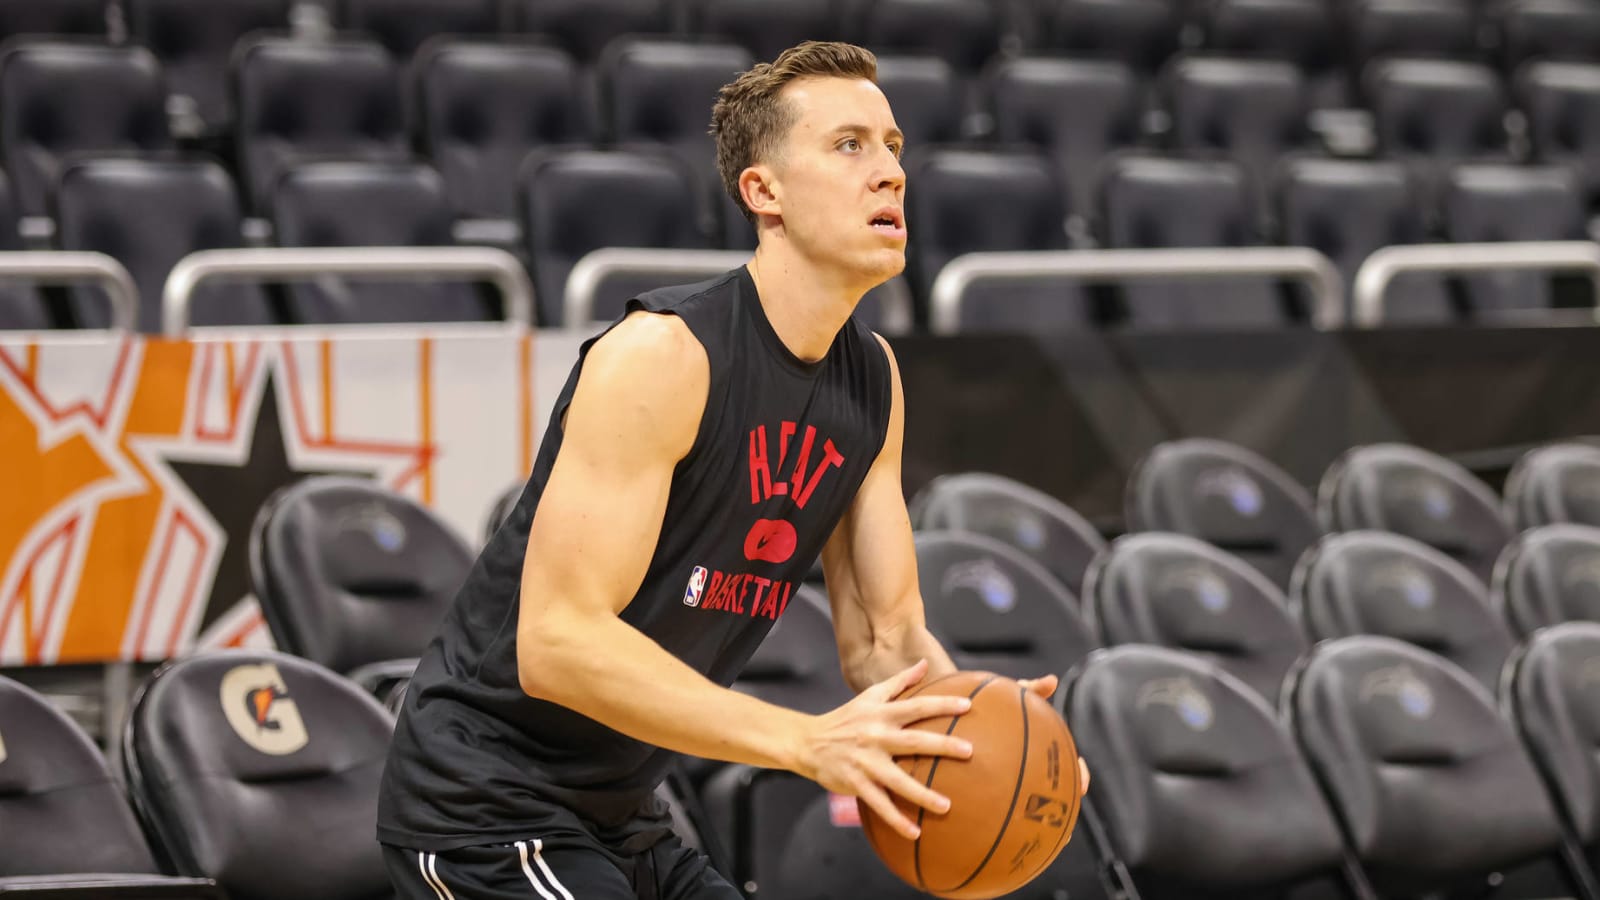 Heat reportedly willing to trade swingman Duncan Robinson